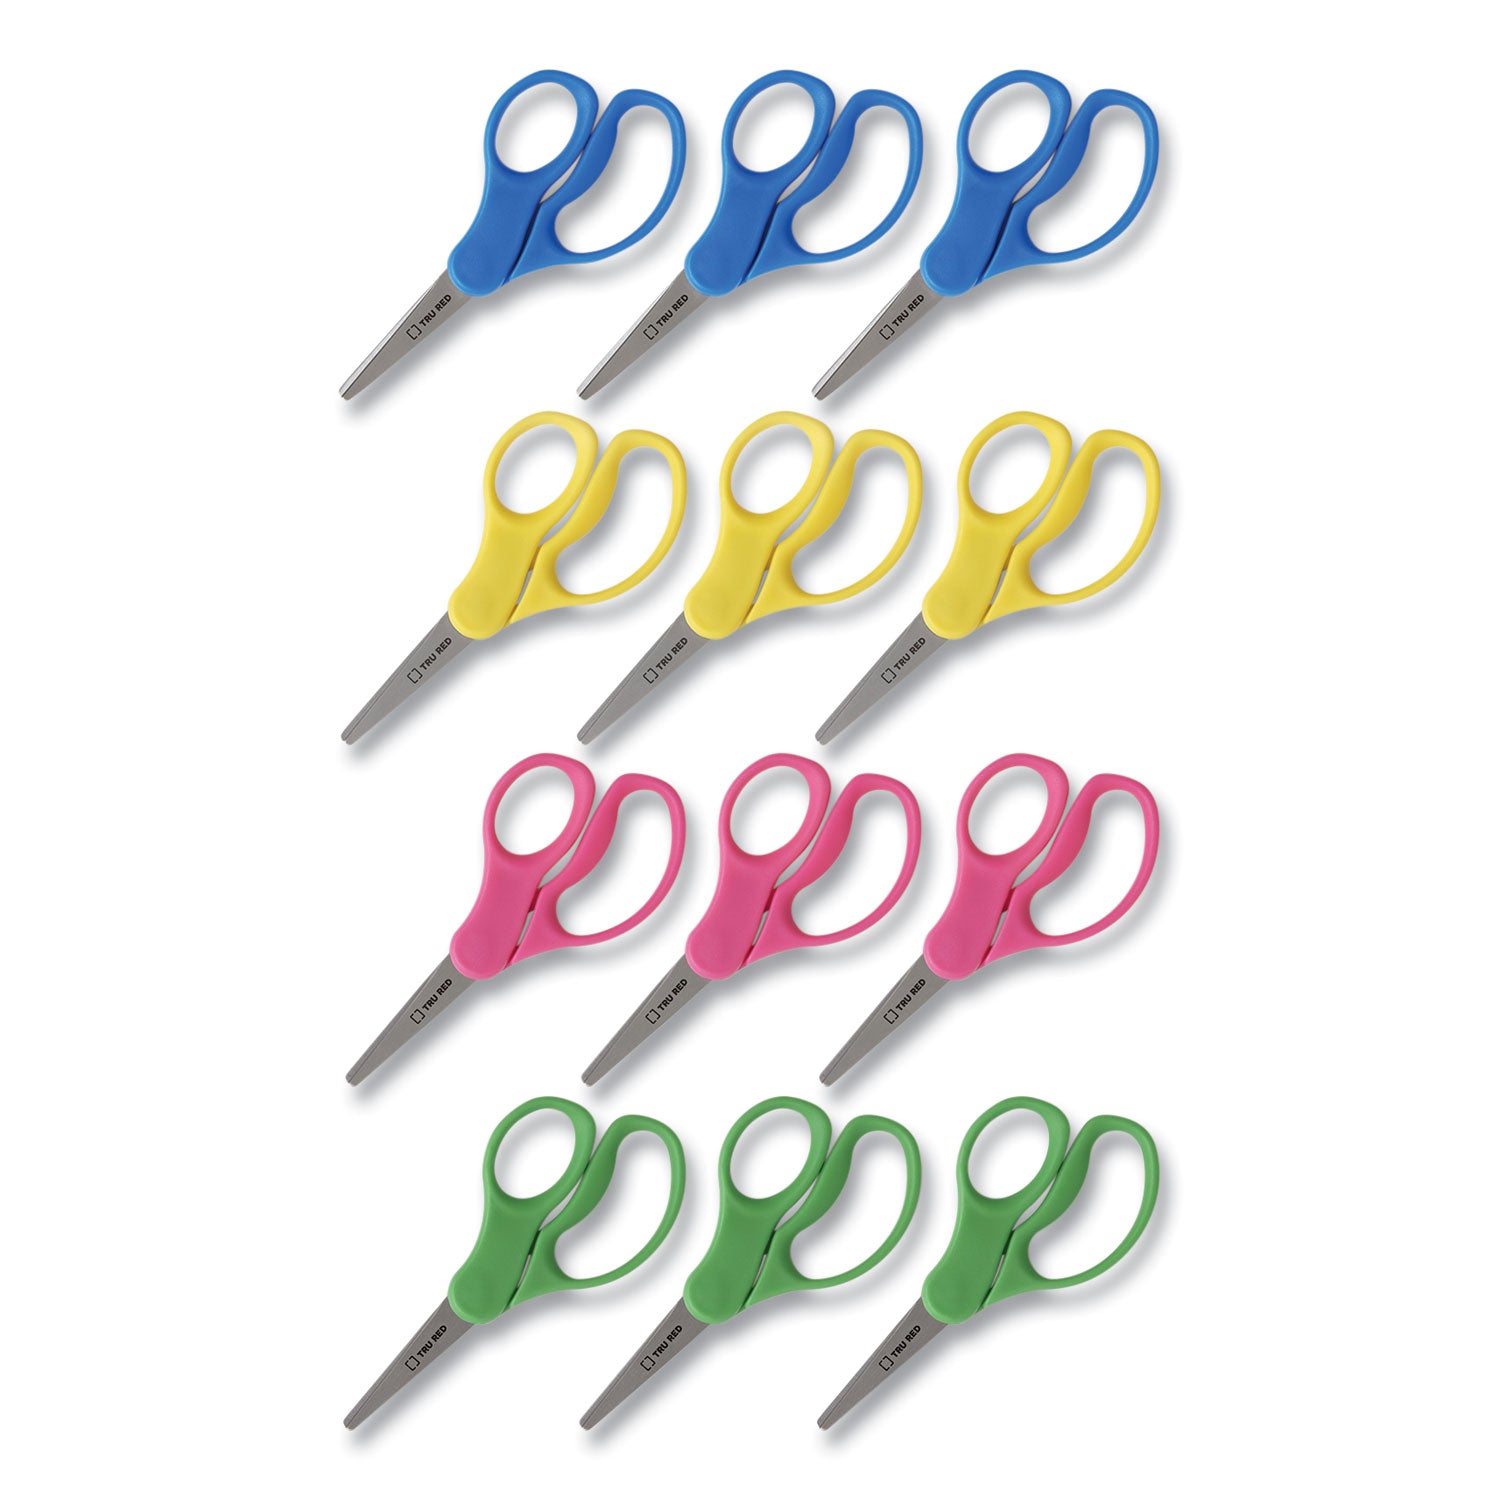 kids-pointed-tip-stainless-steel-scissors-5-long-205-cut-length-assorted-straight-handles-12-pack_tud24380506 - 1